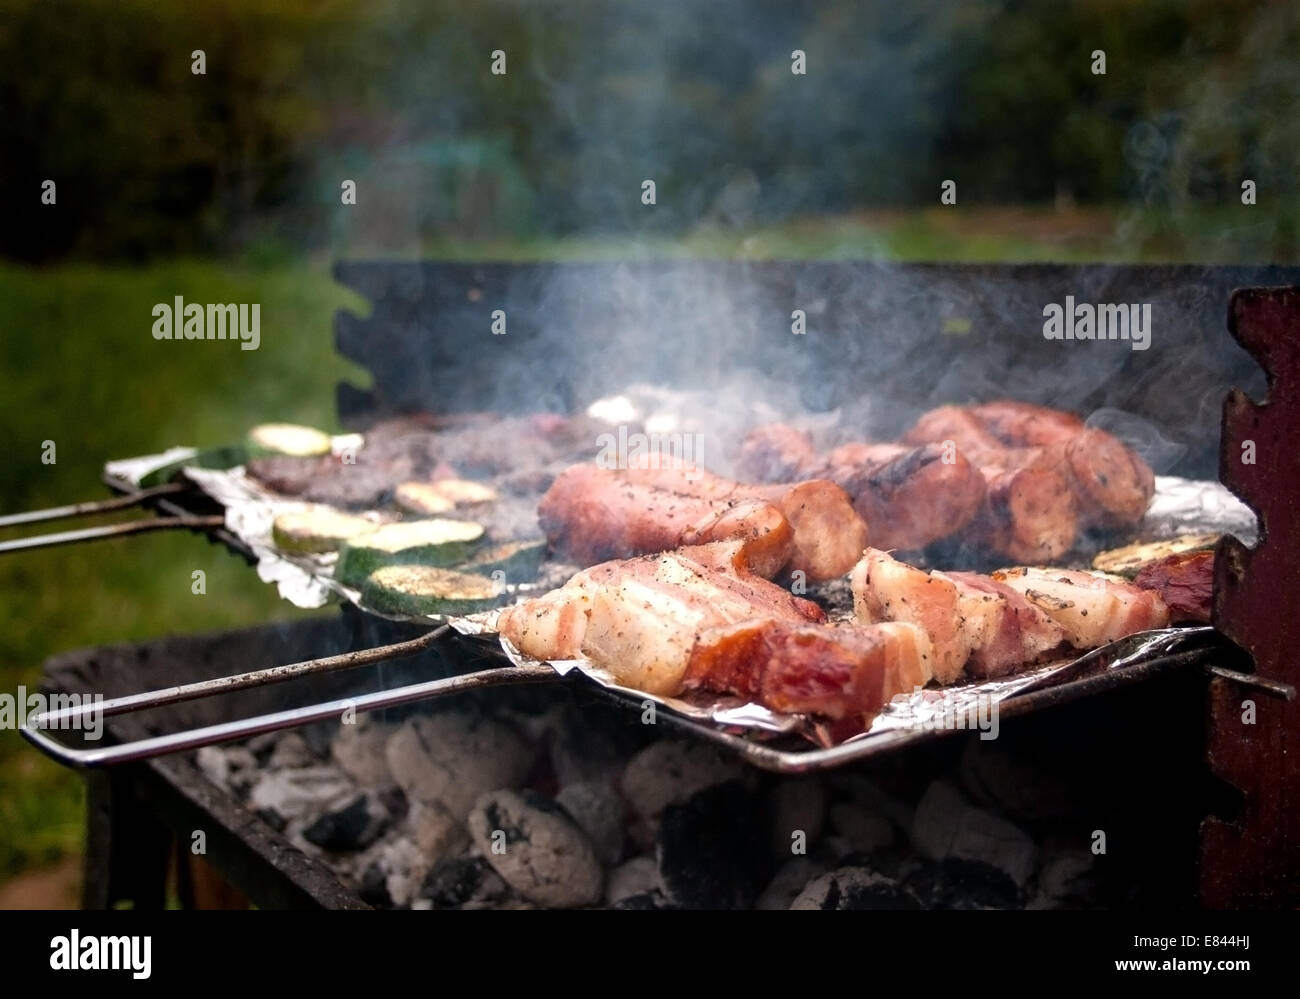 barbecue, grill, cooking outdoors Stock Photo